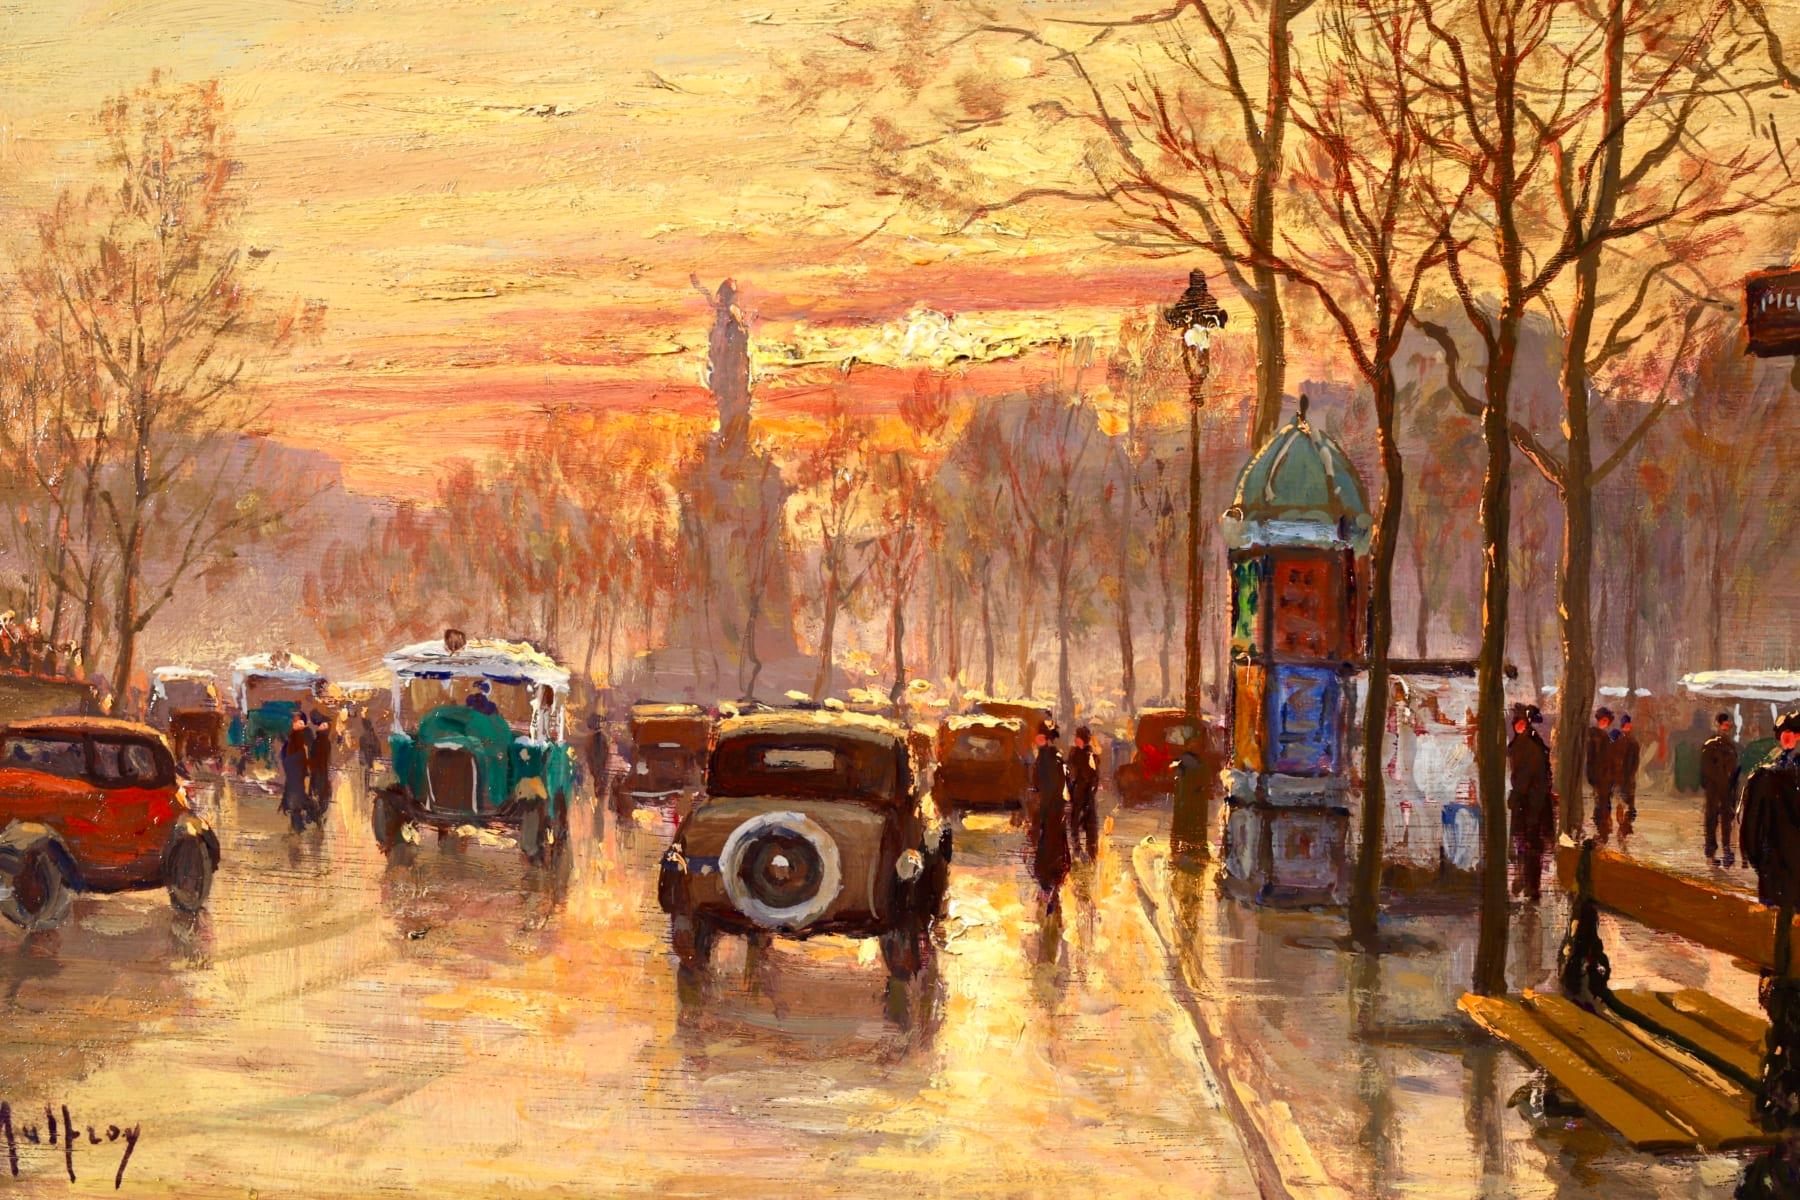 Sunset - Paris - Post Impressionist Oil, Figutres in Cityscape by Henry Malfroy 5